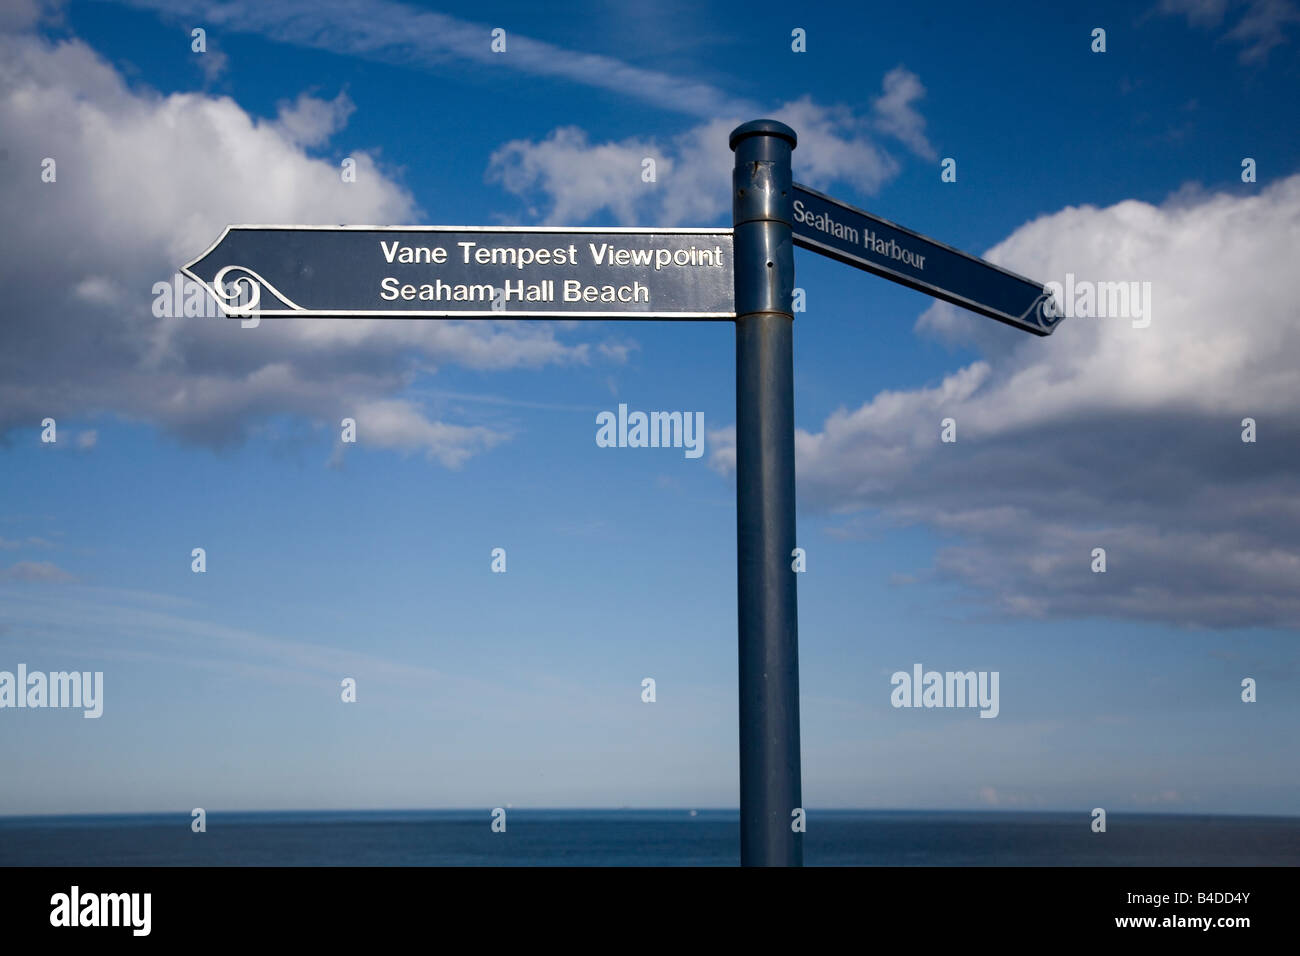 A signpost on the northeast coast of England. The sign points to Vane Tempest Viewpoint and Seaham Harbour. Stock Photo